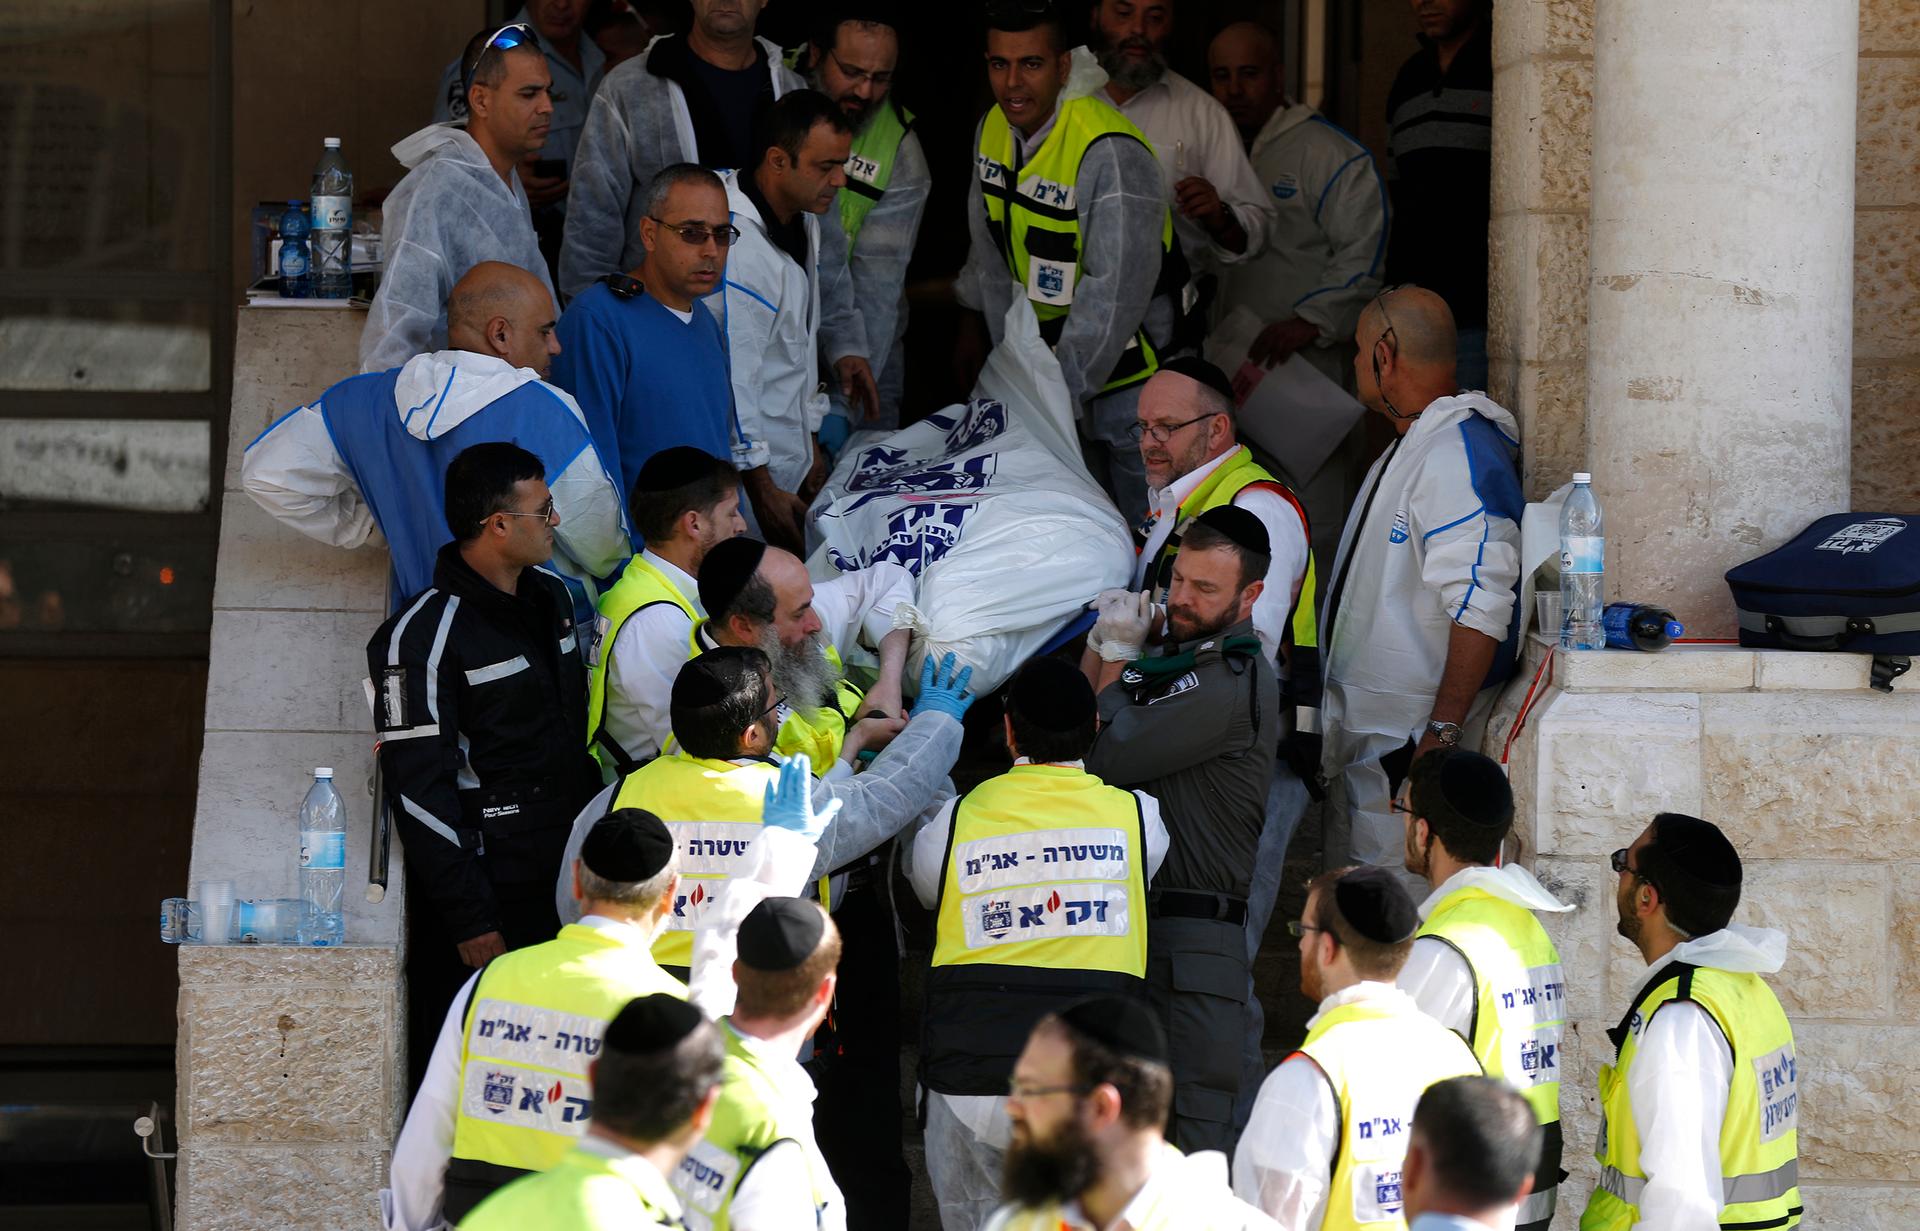 Israeli emergency personnel carry the body of a victim from the scene of an attack at a Jerusalem synagogue on November 18, 2014.